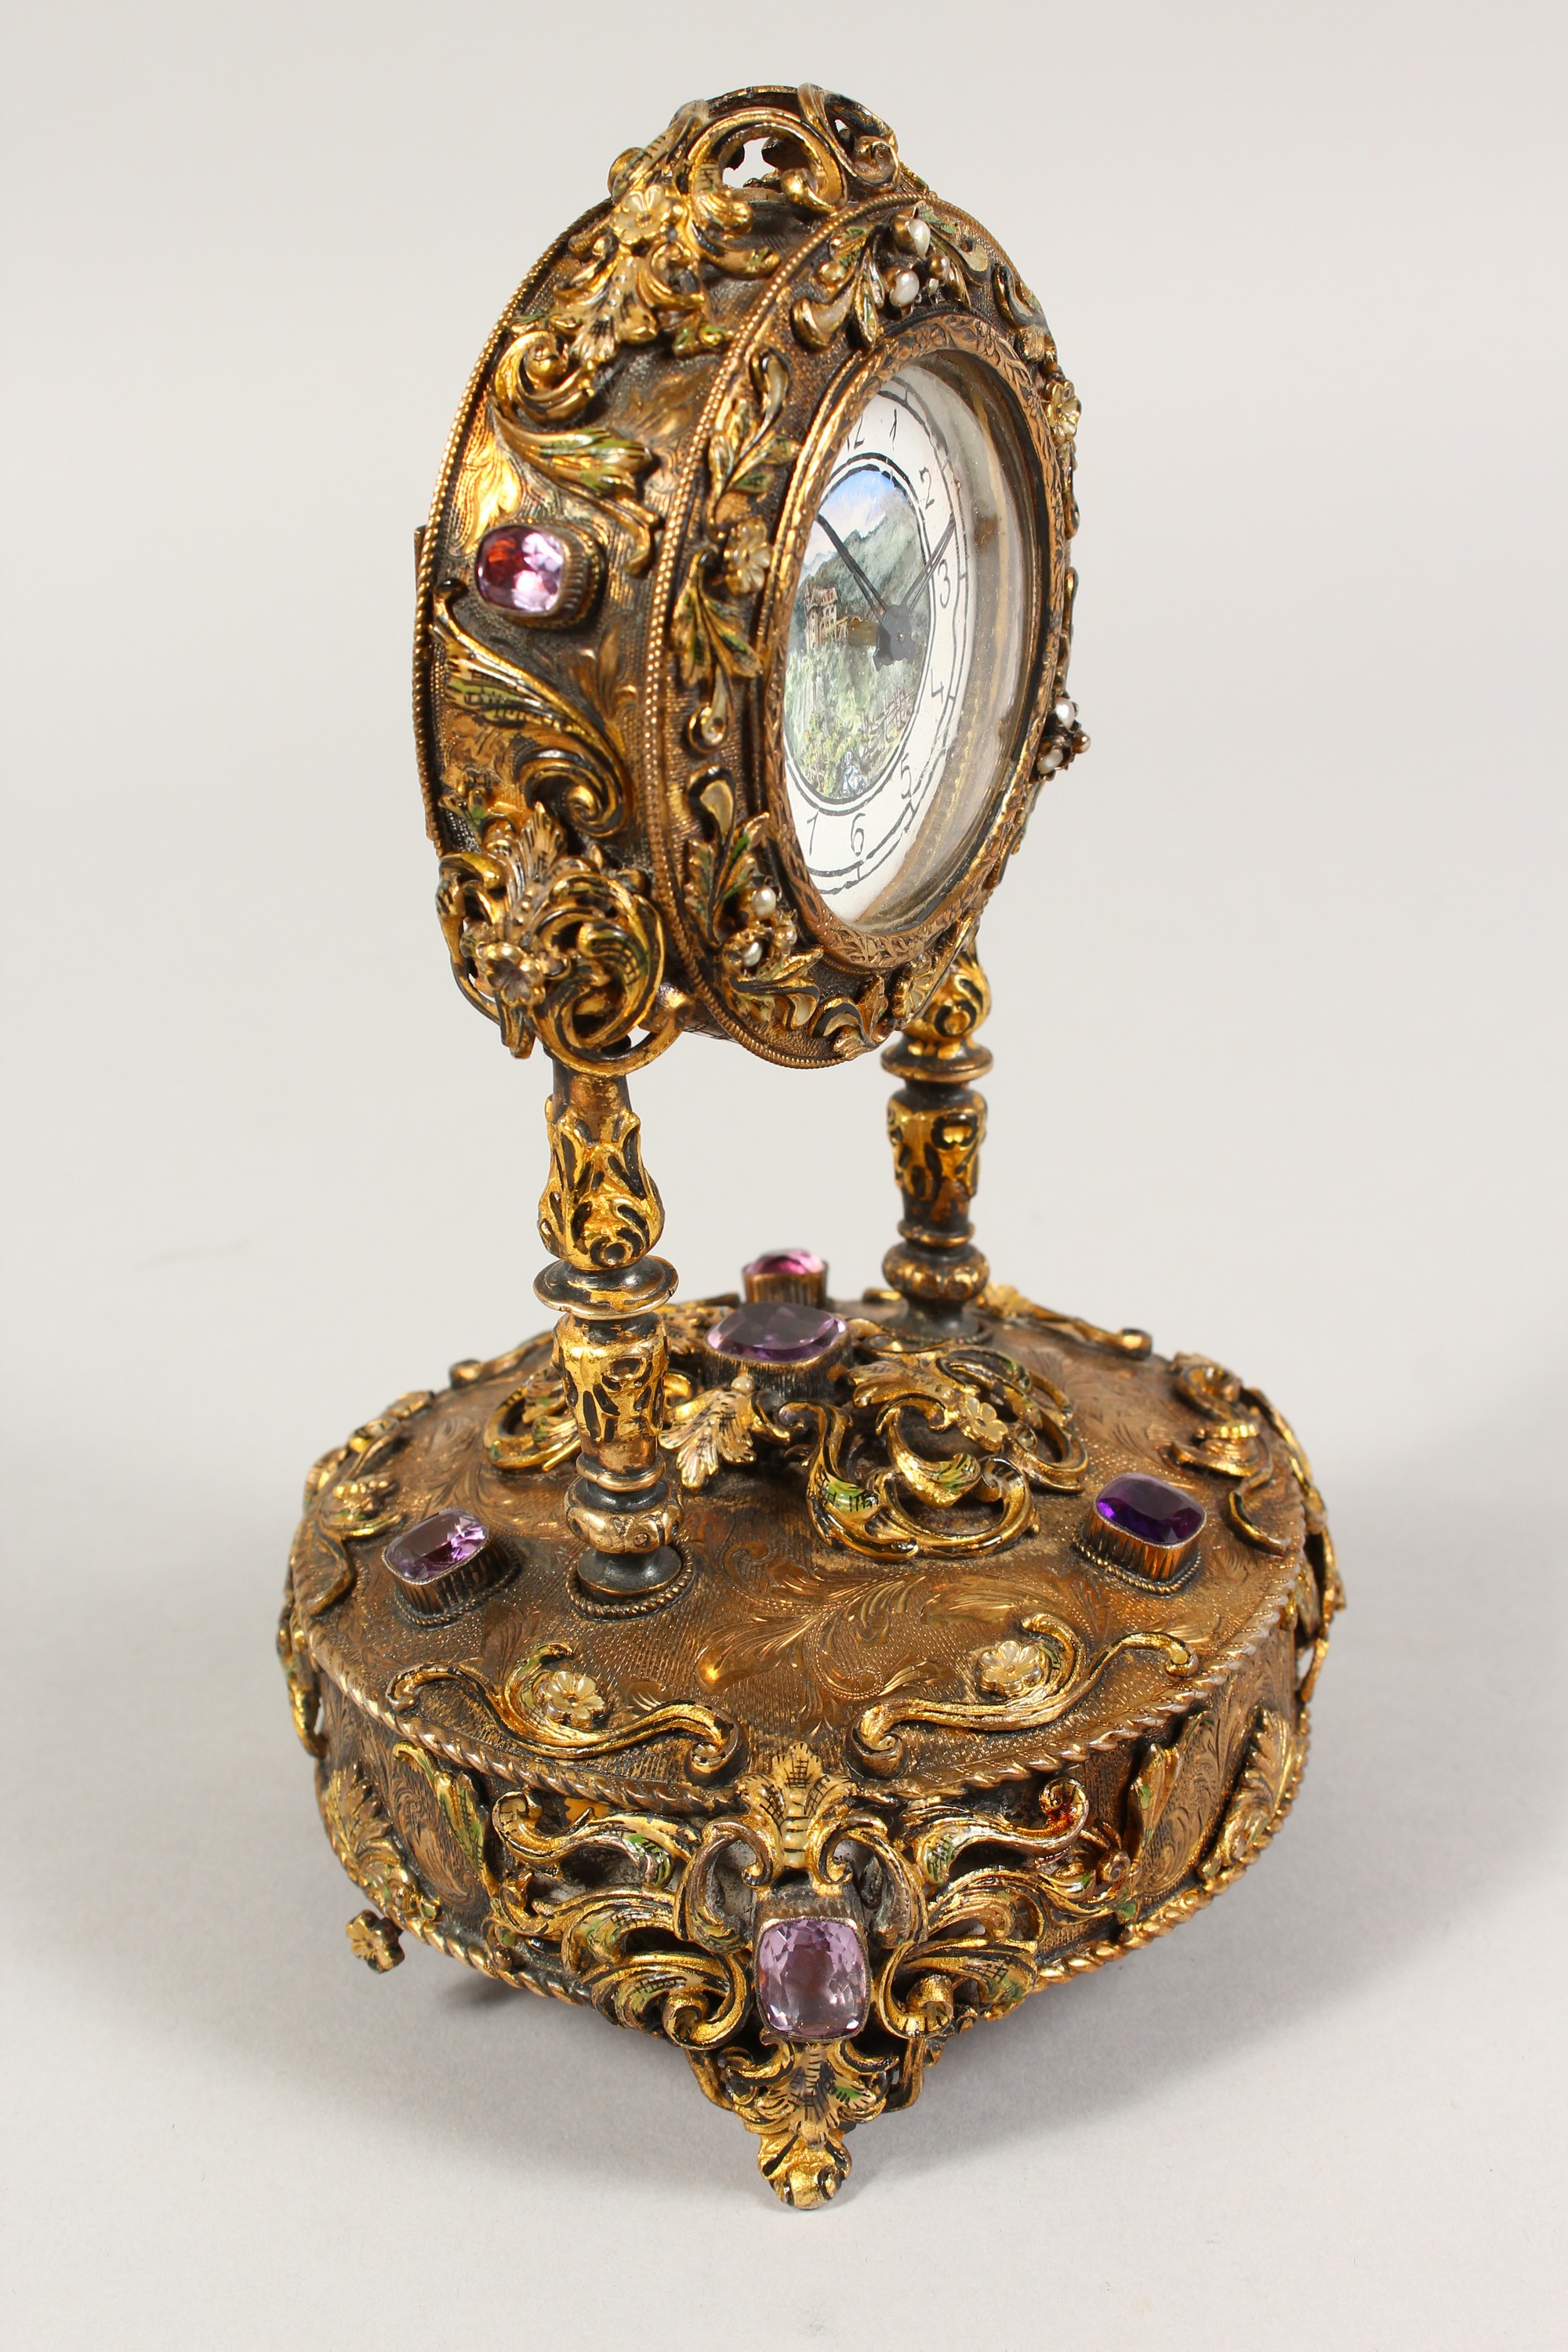 A VERY GOOD RUSSIAN SILVER GILT MUSICAL CLOCK, set with semi-precious stones, the face painted - Image 2 of 6